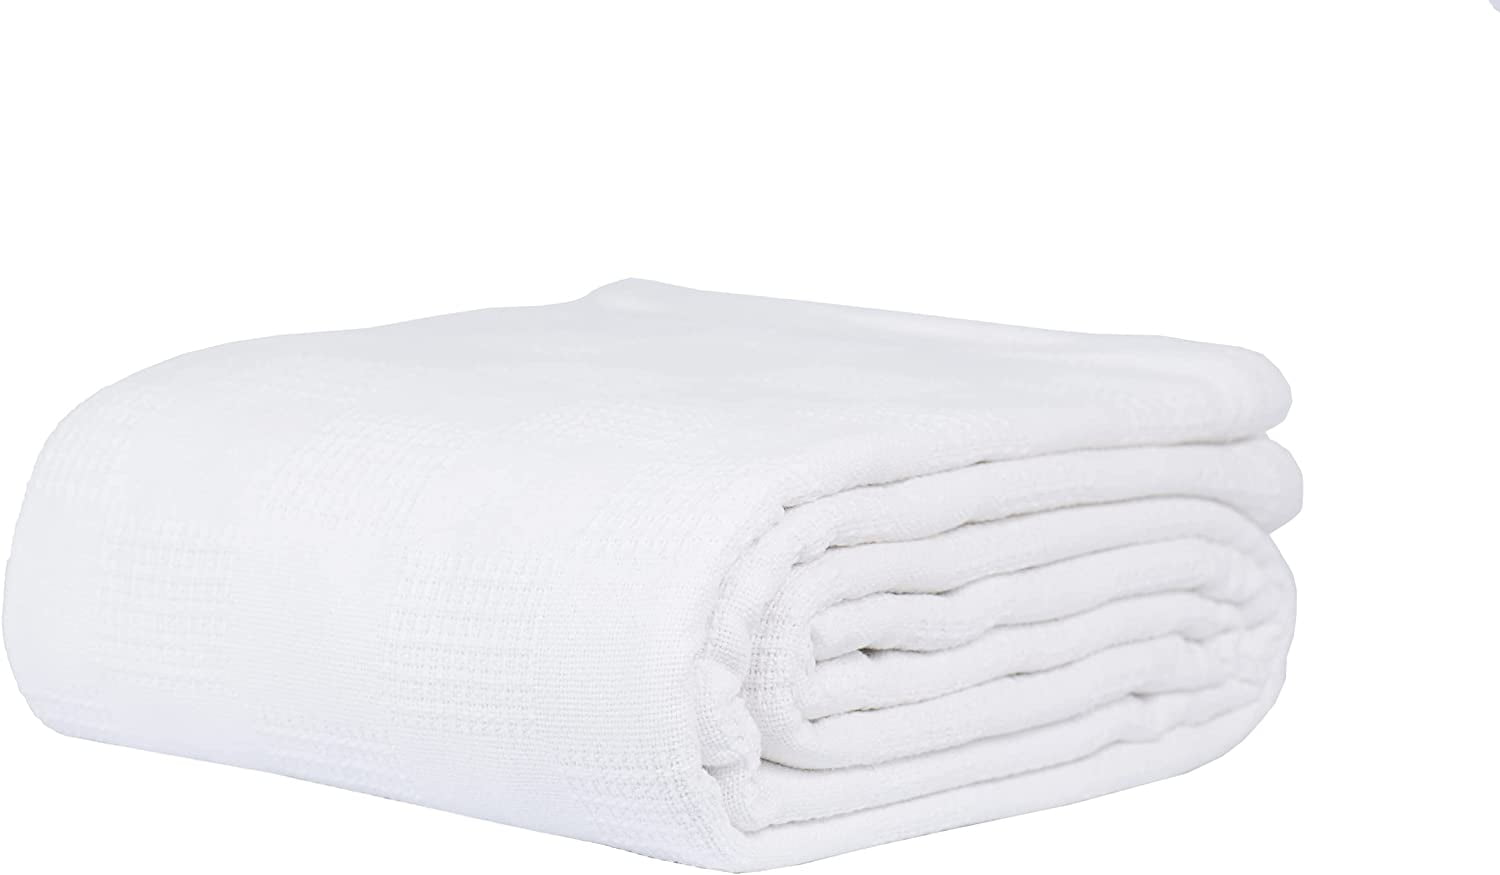 SNAGLESS Spread White) Hospital Blanket, Cotton Thermal (74x100 100% in, Textile Linteum